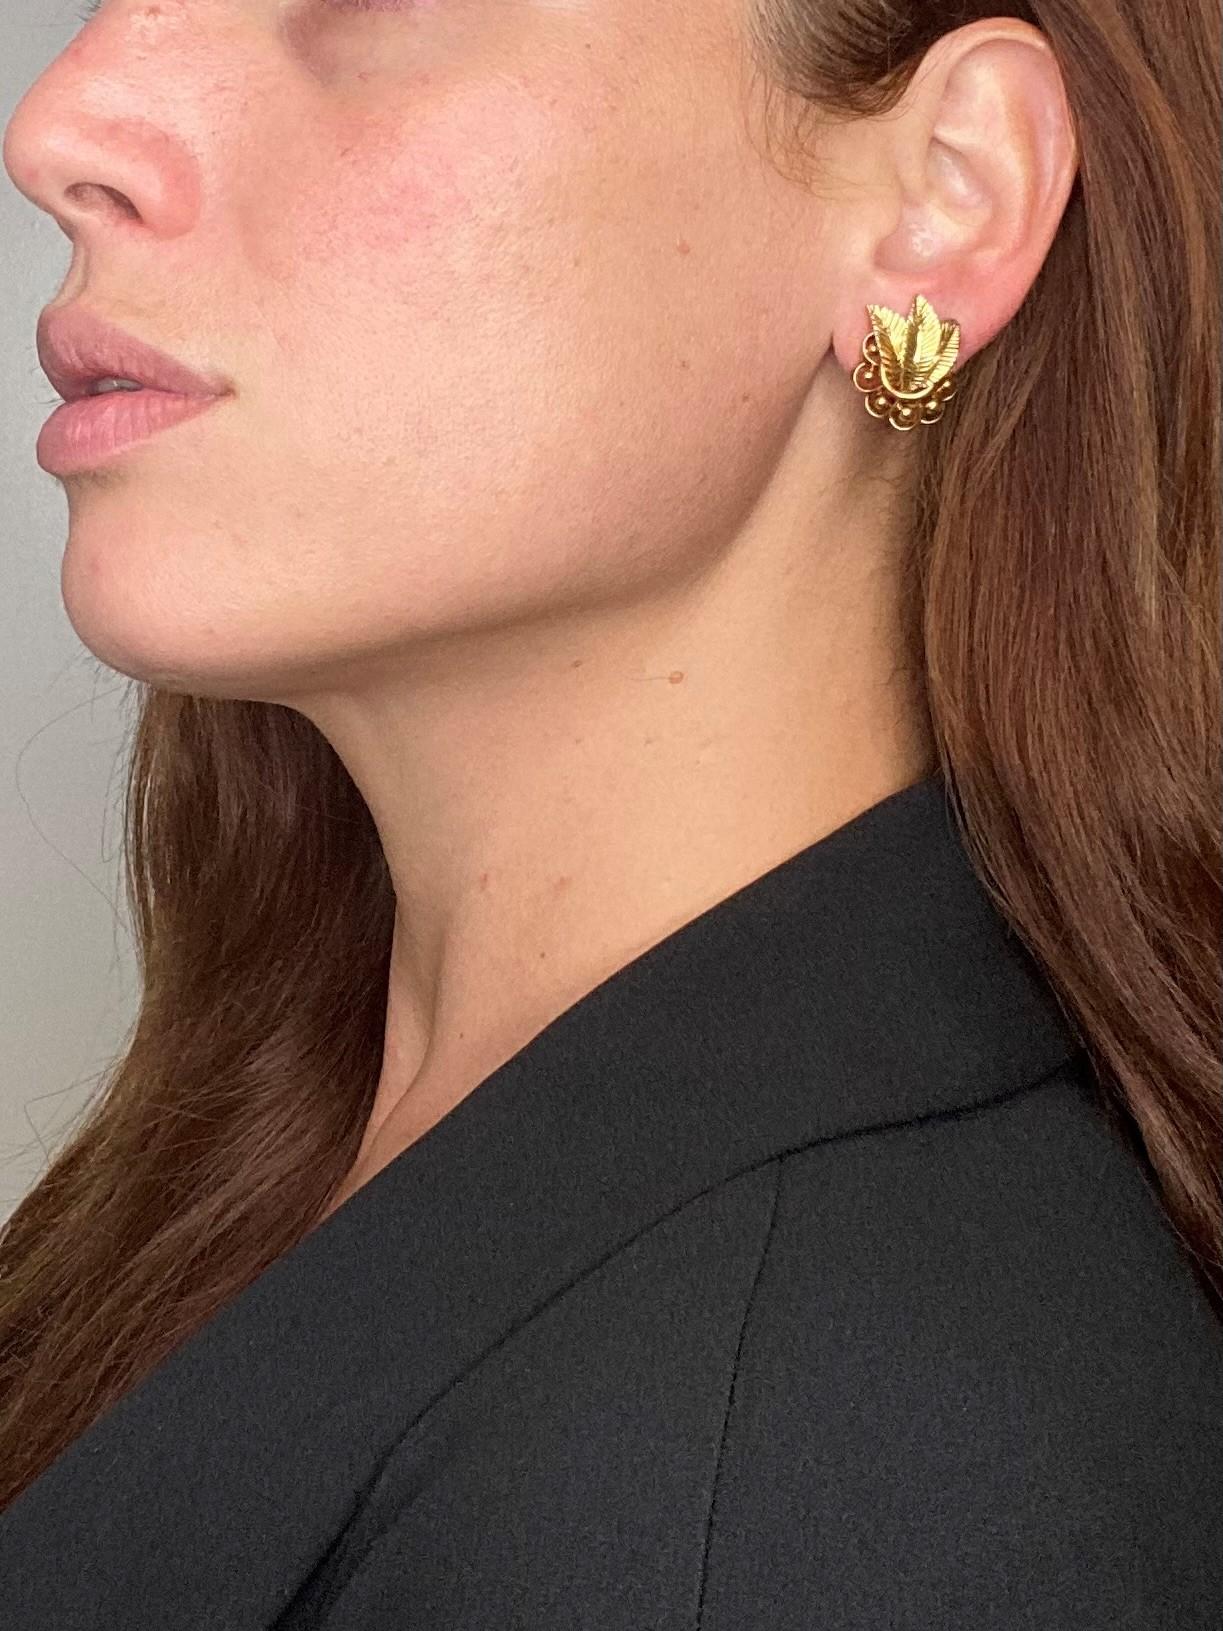 Vintage clips-earrings designed by Boucheron.

Beautiful early pieces made in Paris, France during the transitional post war period of the Art-Deco and the mid-century, Circa 1940's. This pair of clips-earrings has been crafted in solid yellow gold